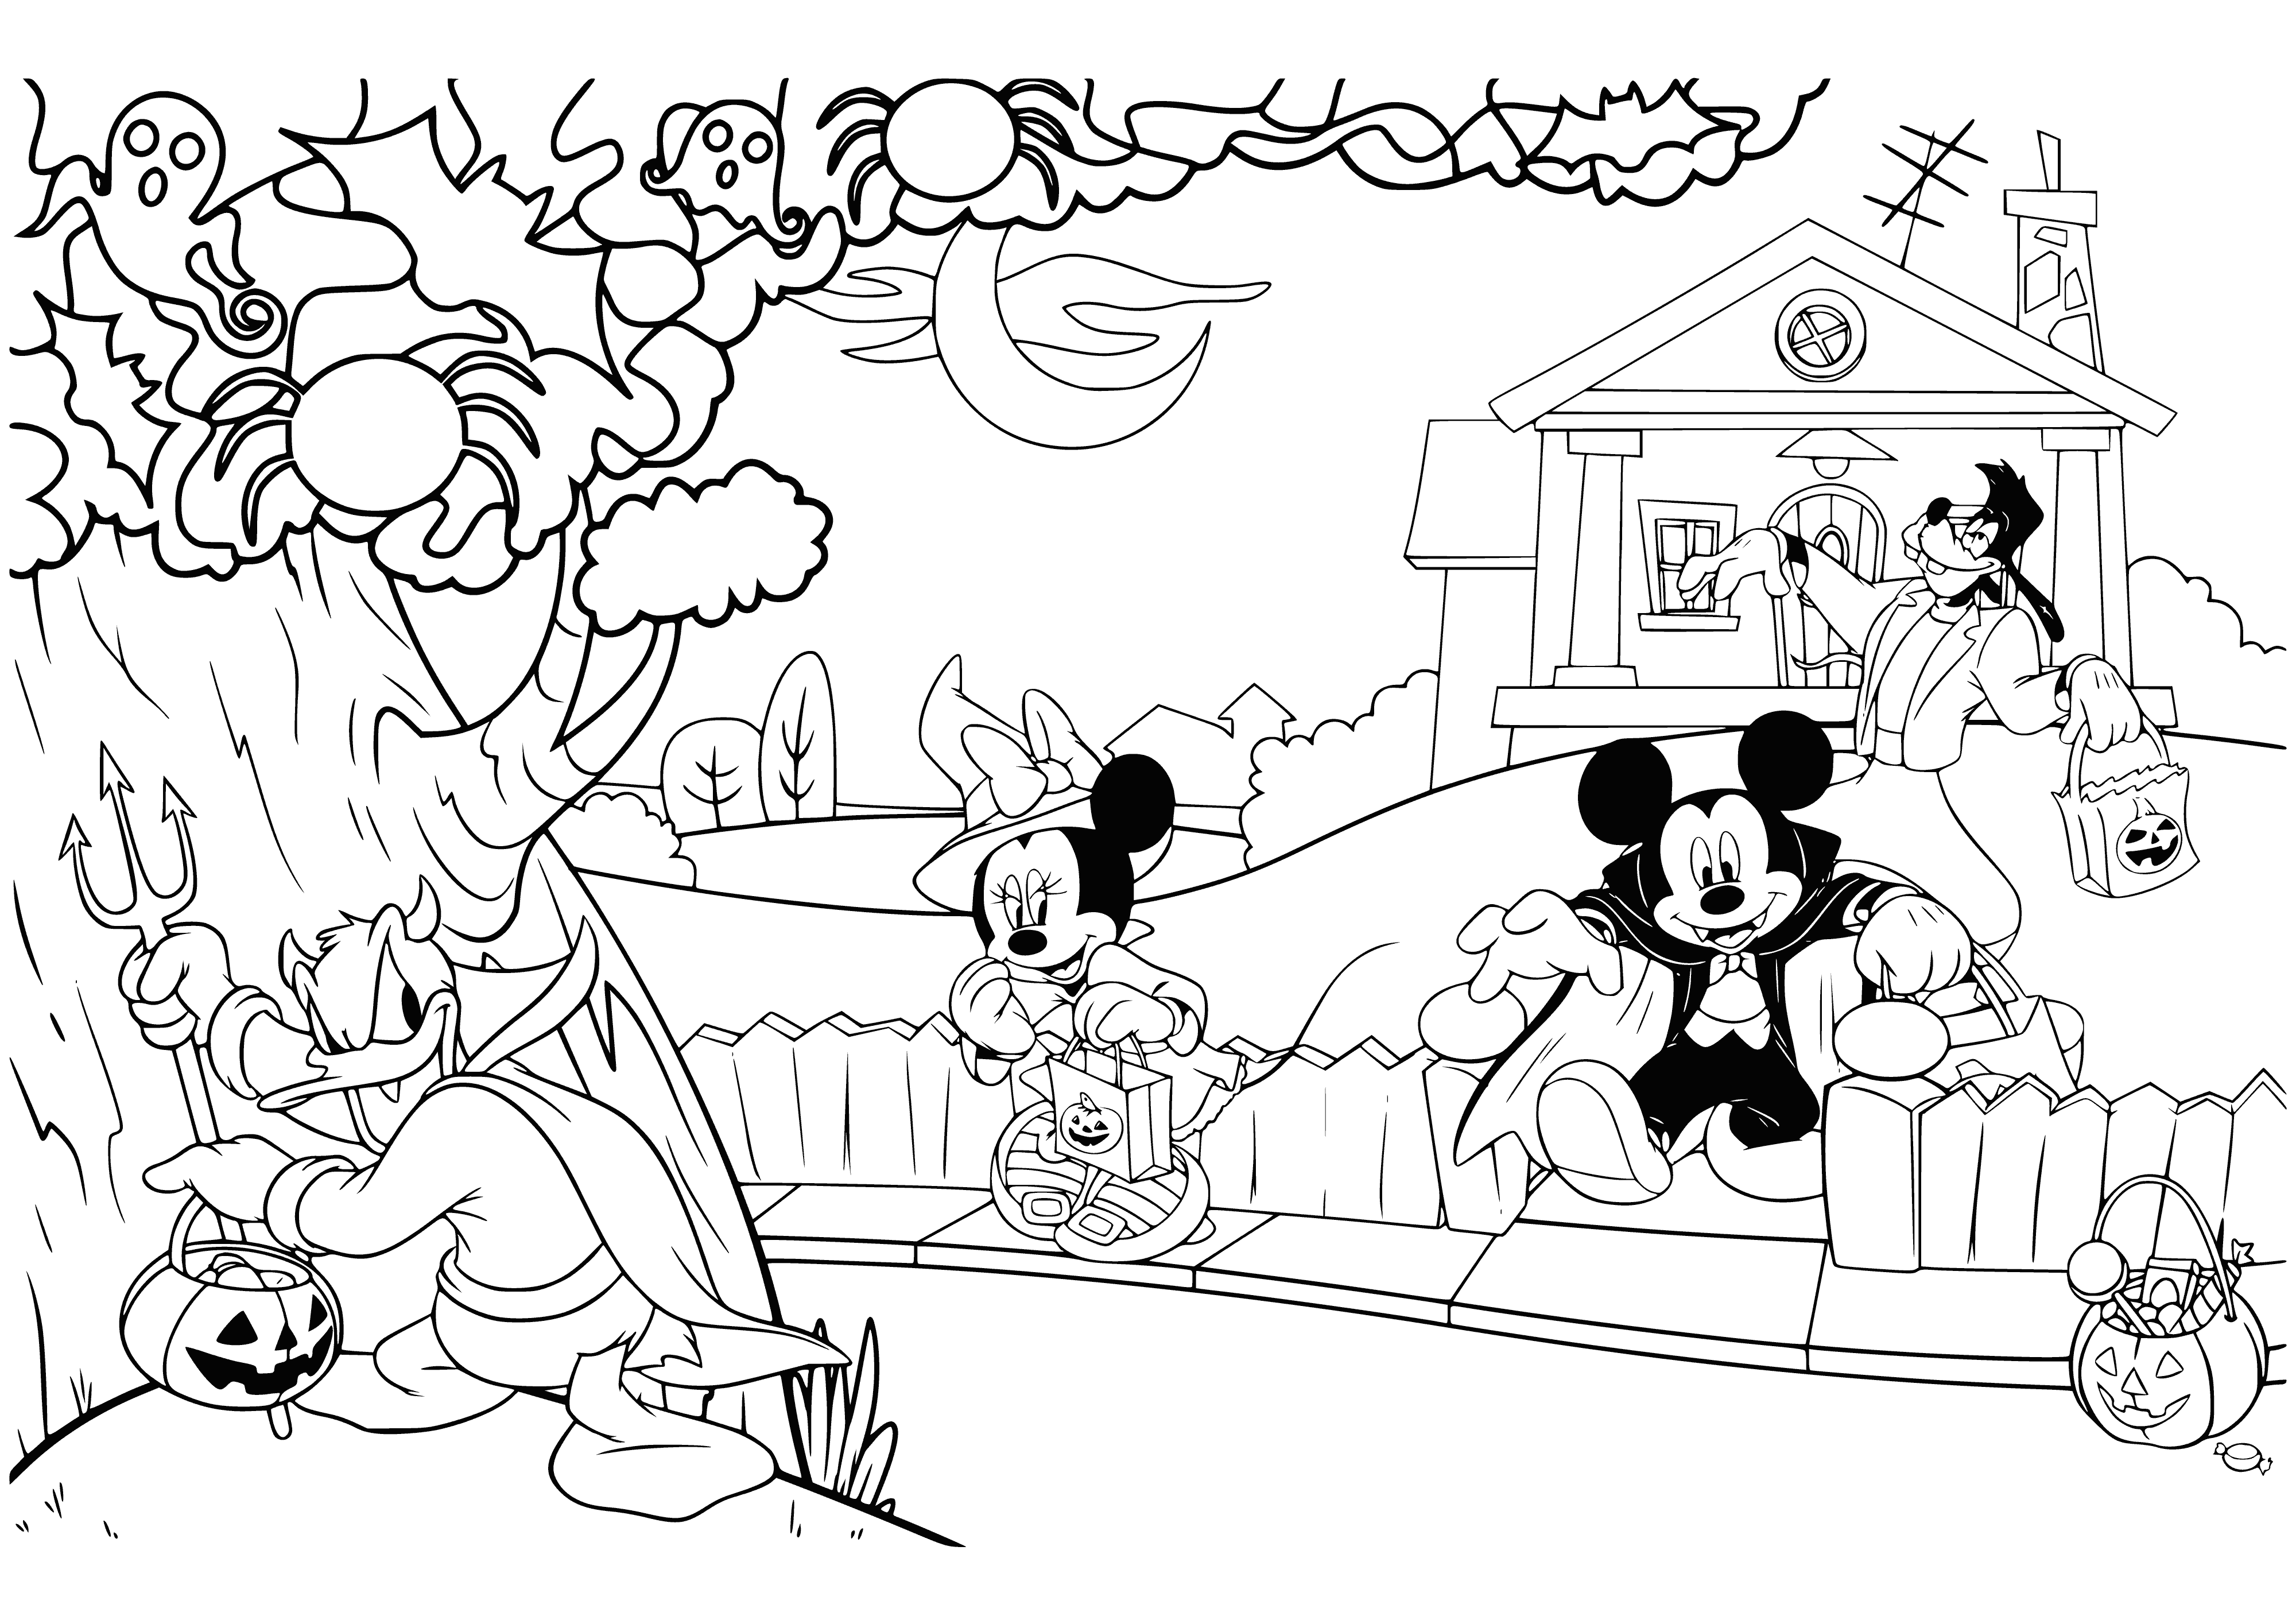 coloring page: Mickey and friends celebrate Halloween in their costumes ready to go trick-or-treating, having a great time! #halloween